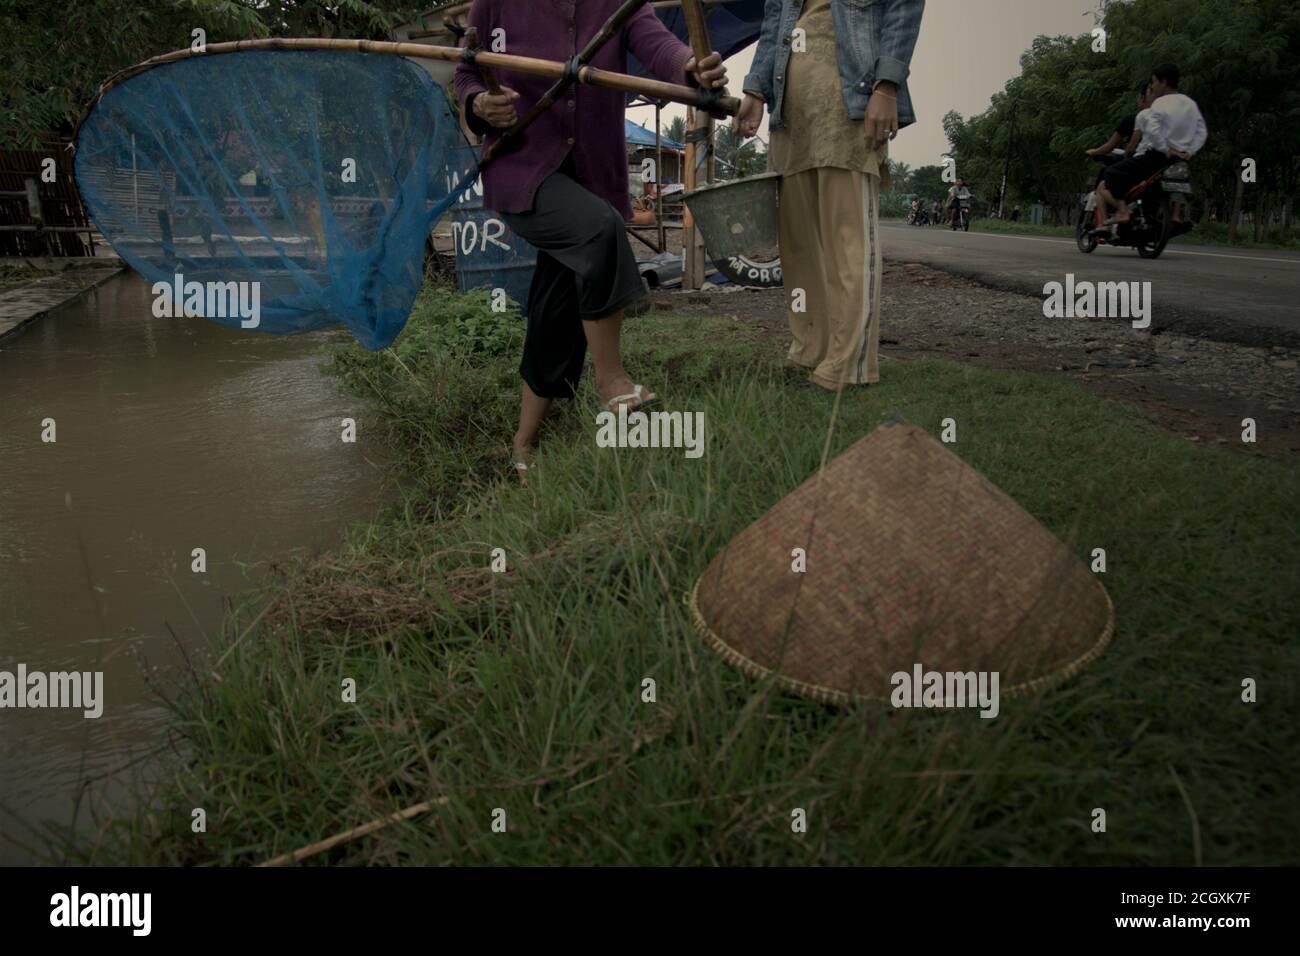 A woman handling a pushnet as she moves on the bank of a roadside irrigation canal in Karawang regency, West Java province, Indonesia. Stock Photo